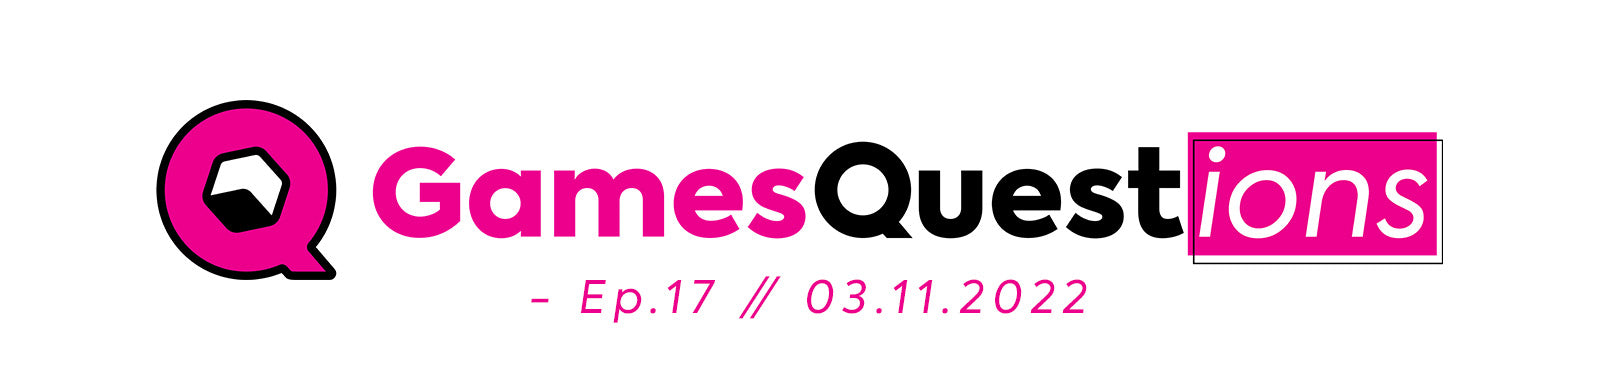 GamesQuestions Ep.17 // 03.11.2022